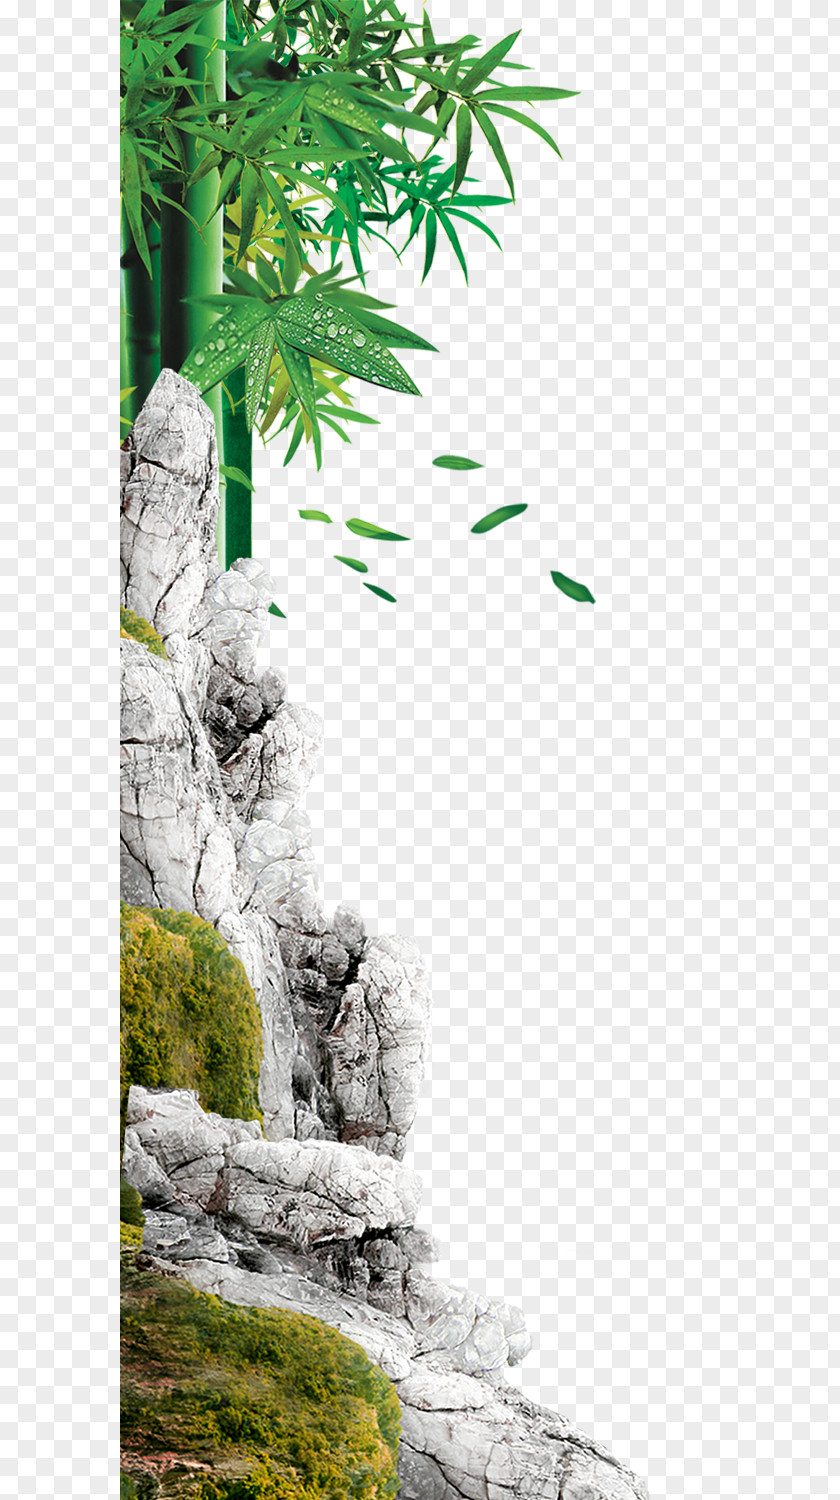 Green Bamboo Poster Template PNG